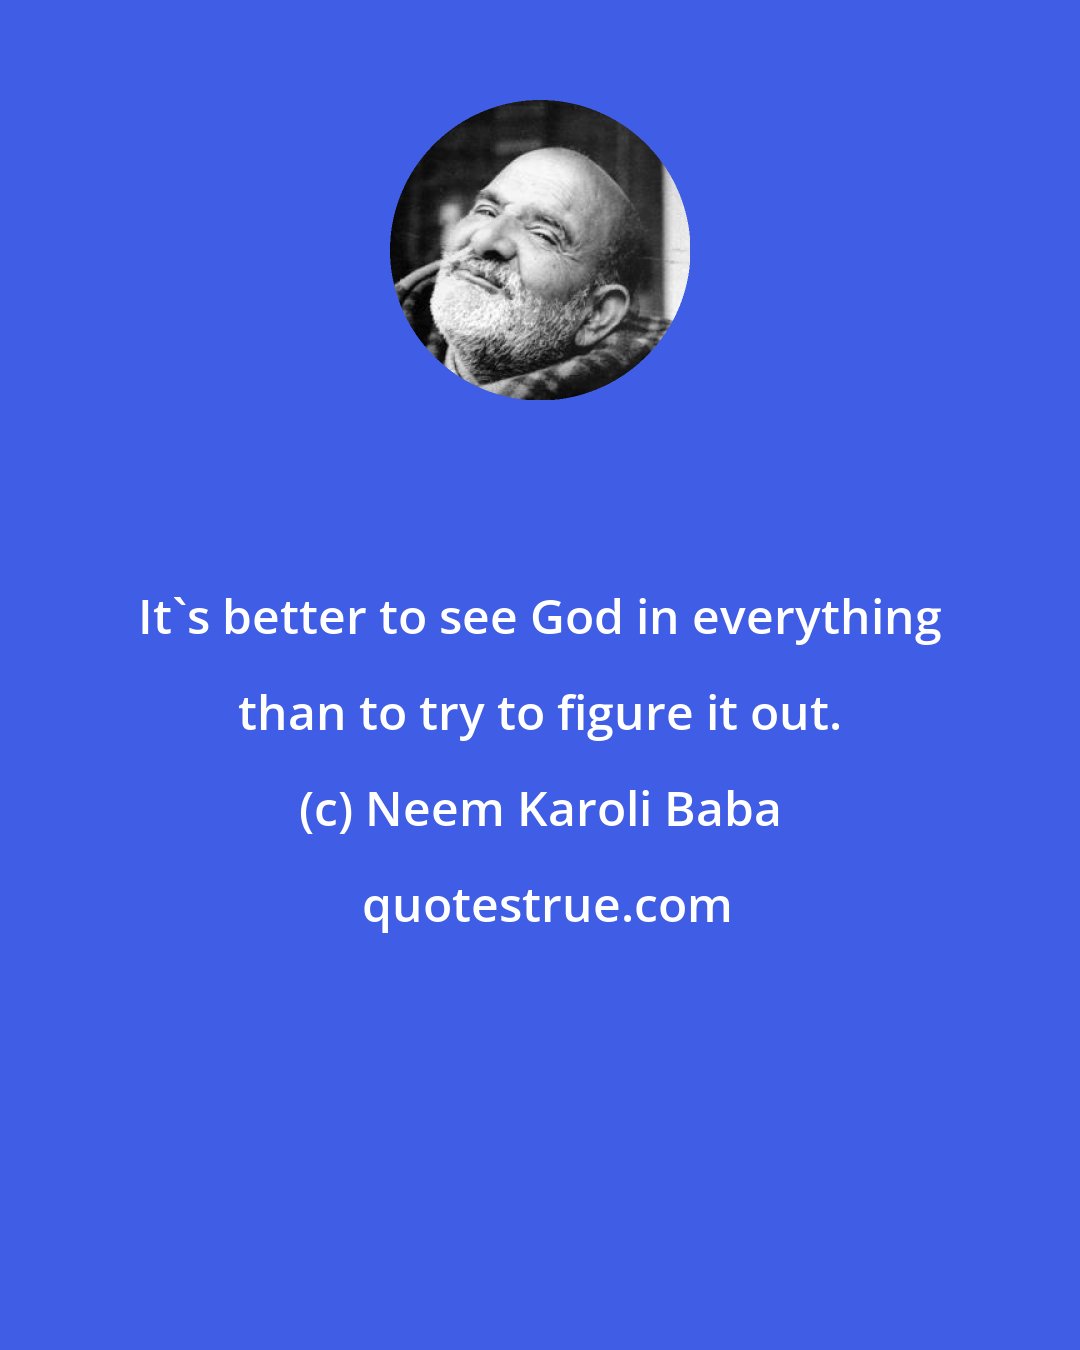 Neem Karoli Baba: It's better to see God in everything than to try to figure it out.